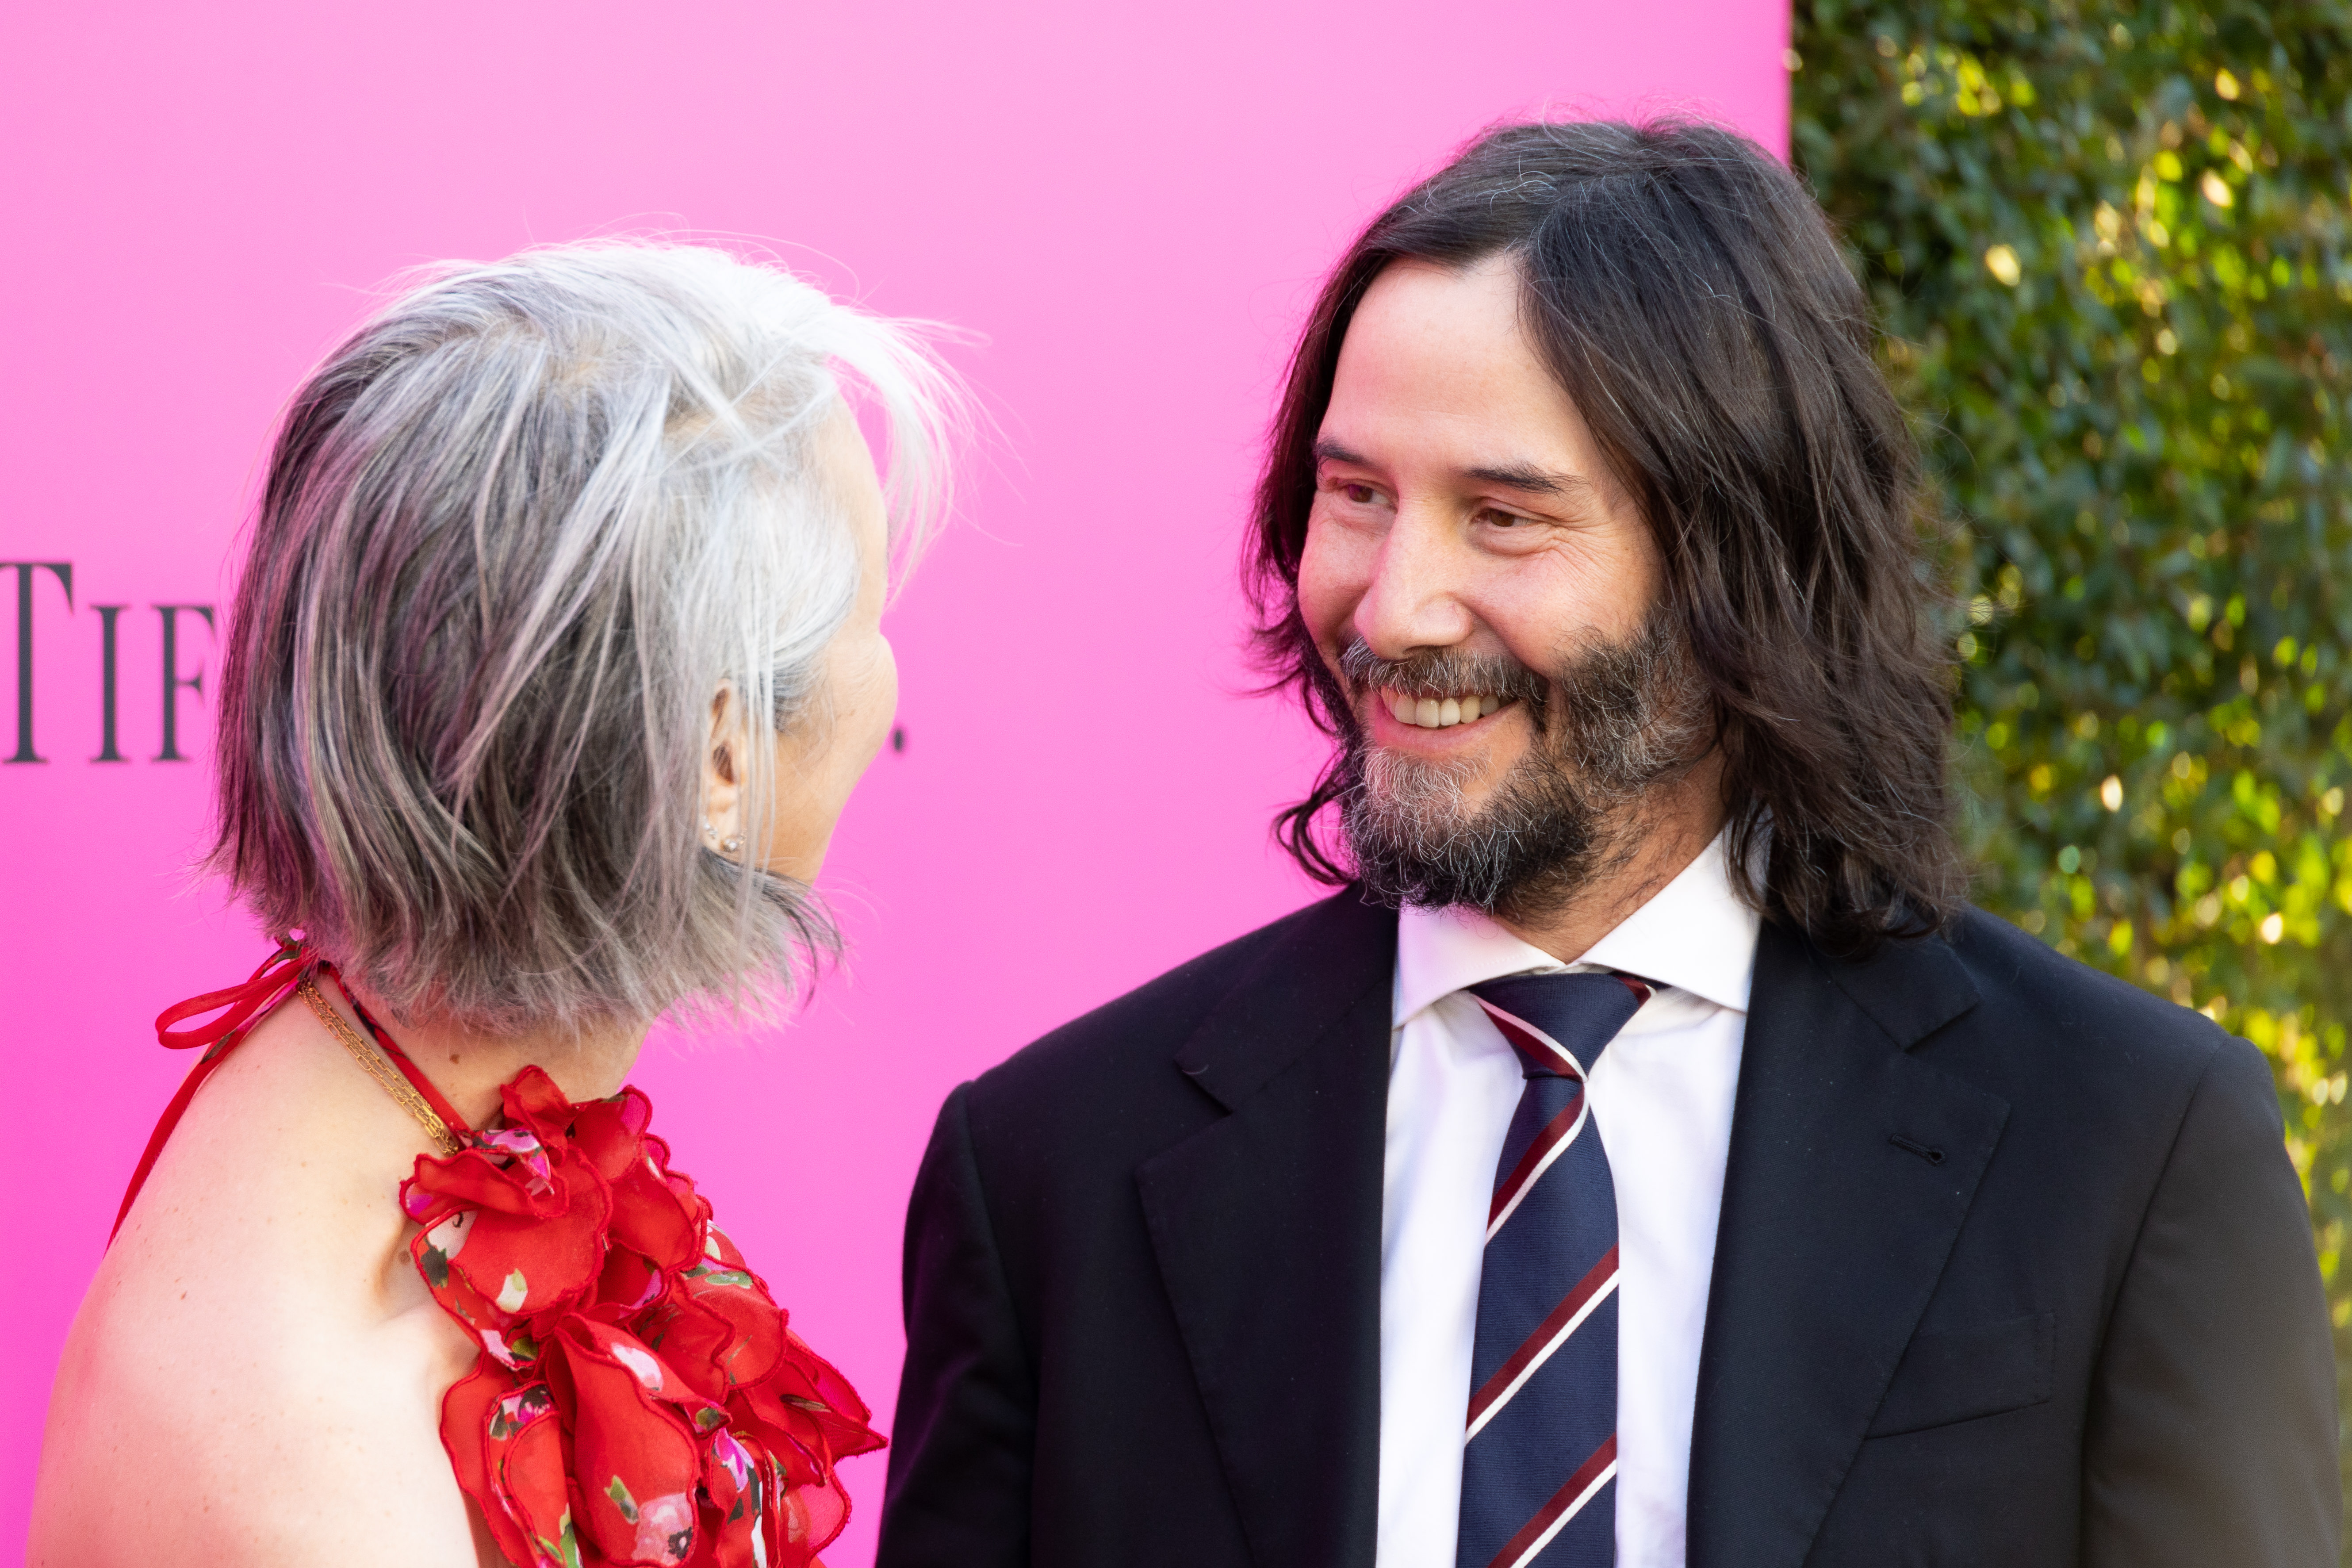 Alexandra Grant and Keanu Reeves at the MOCA Gala in Los Angeles, California on April 15, 2023 | Source: Getty Images